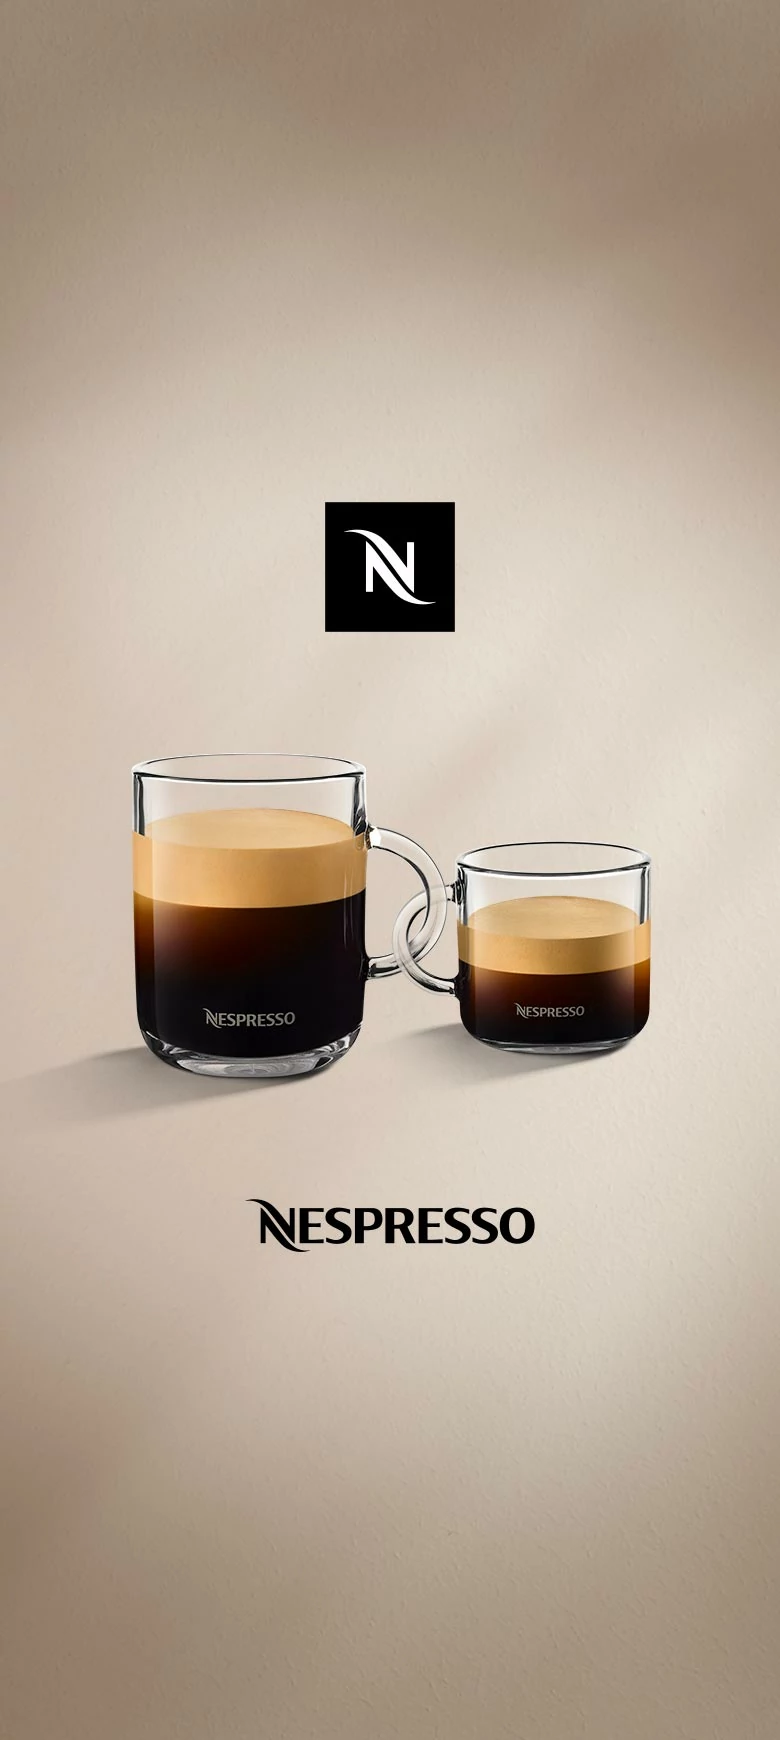 Two glasses of different sizes filled with coffee. The Nespresso signet and logo can be seen above and below.